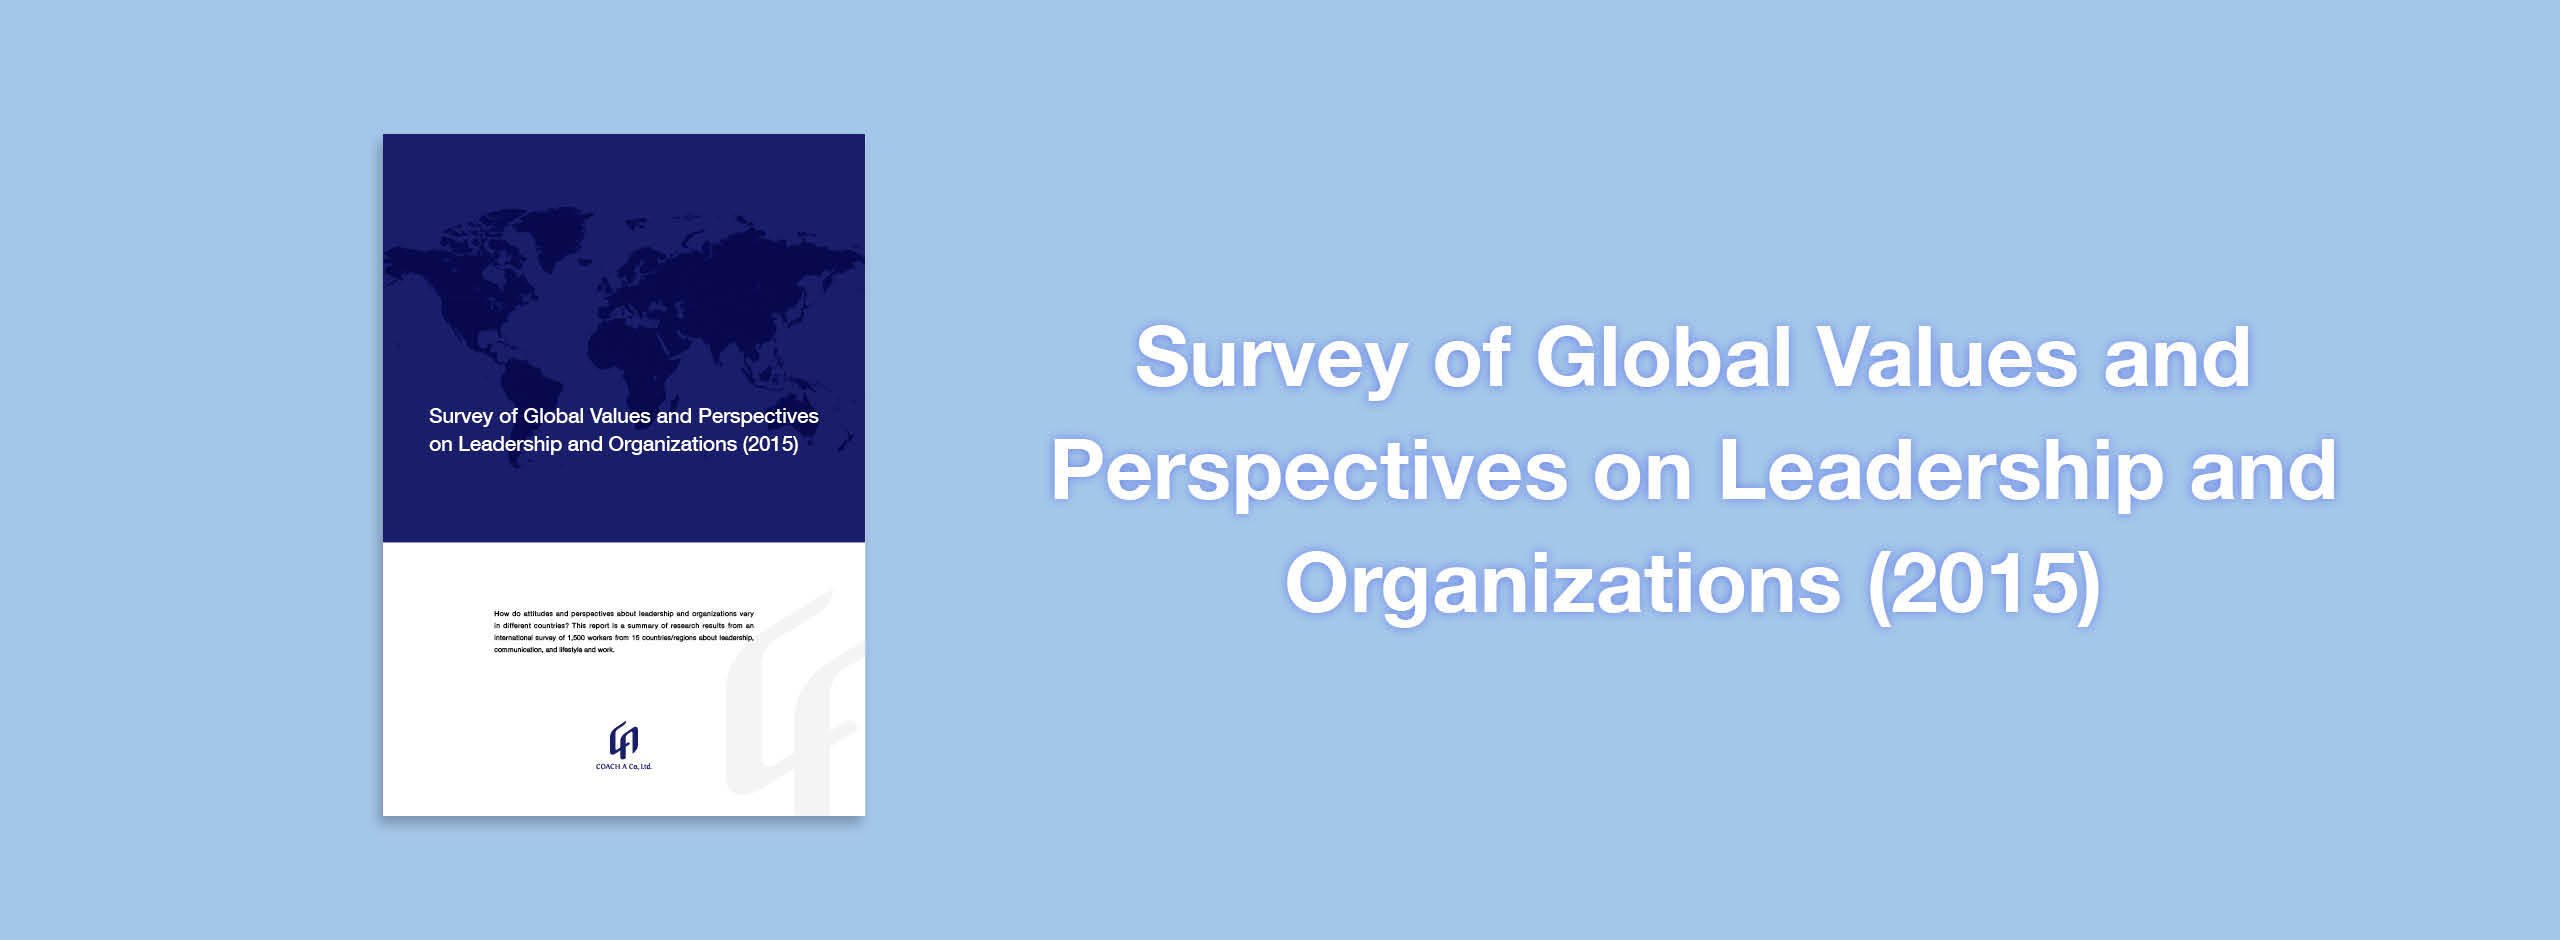 Survey of Global Values and Perspectives on Leadership and Organizations (2015)